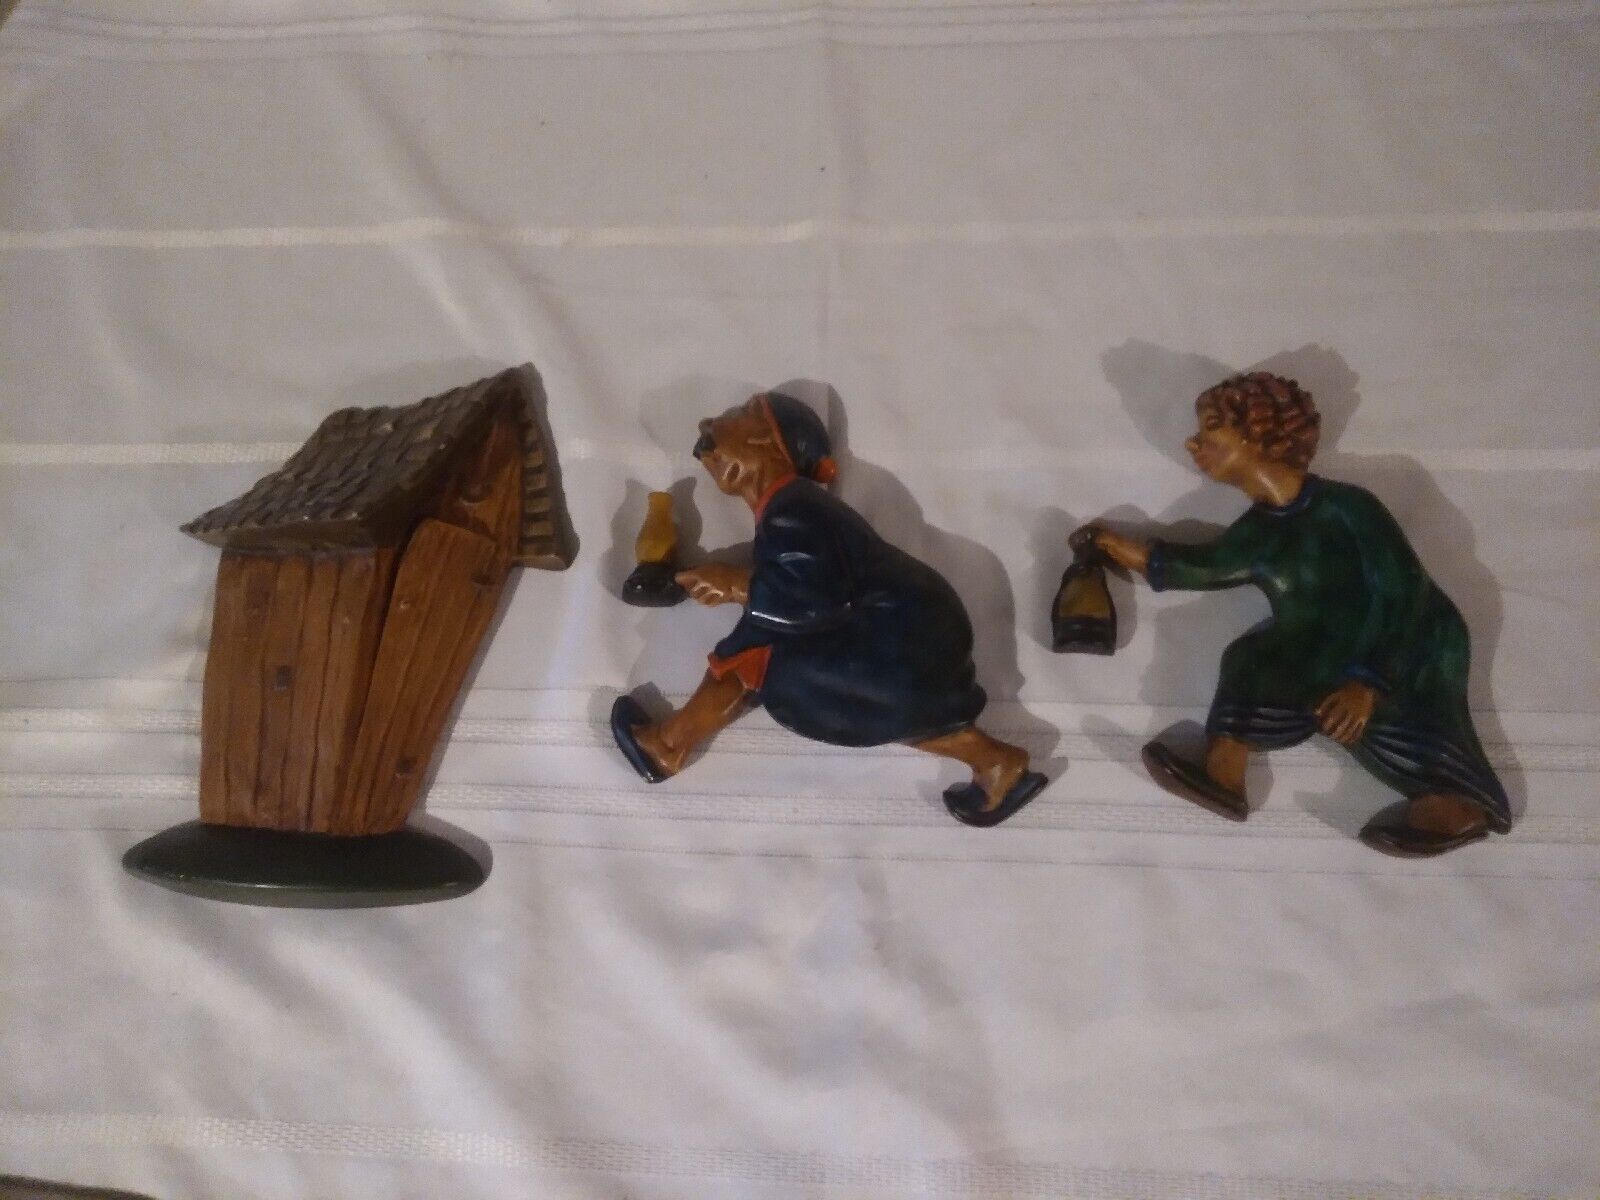 Vintage ‘Race To The Outhouse’ Ceramic Wall Hanging Man/Woman/Outhouse